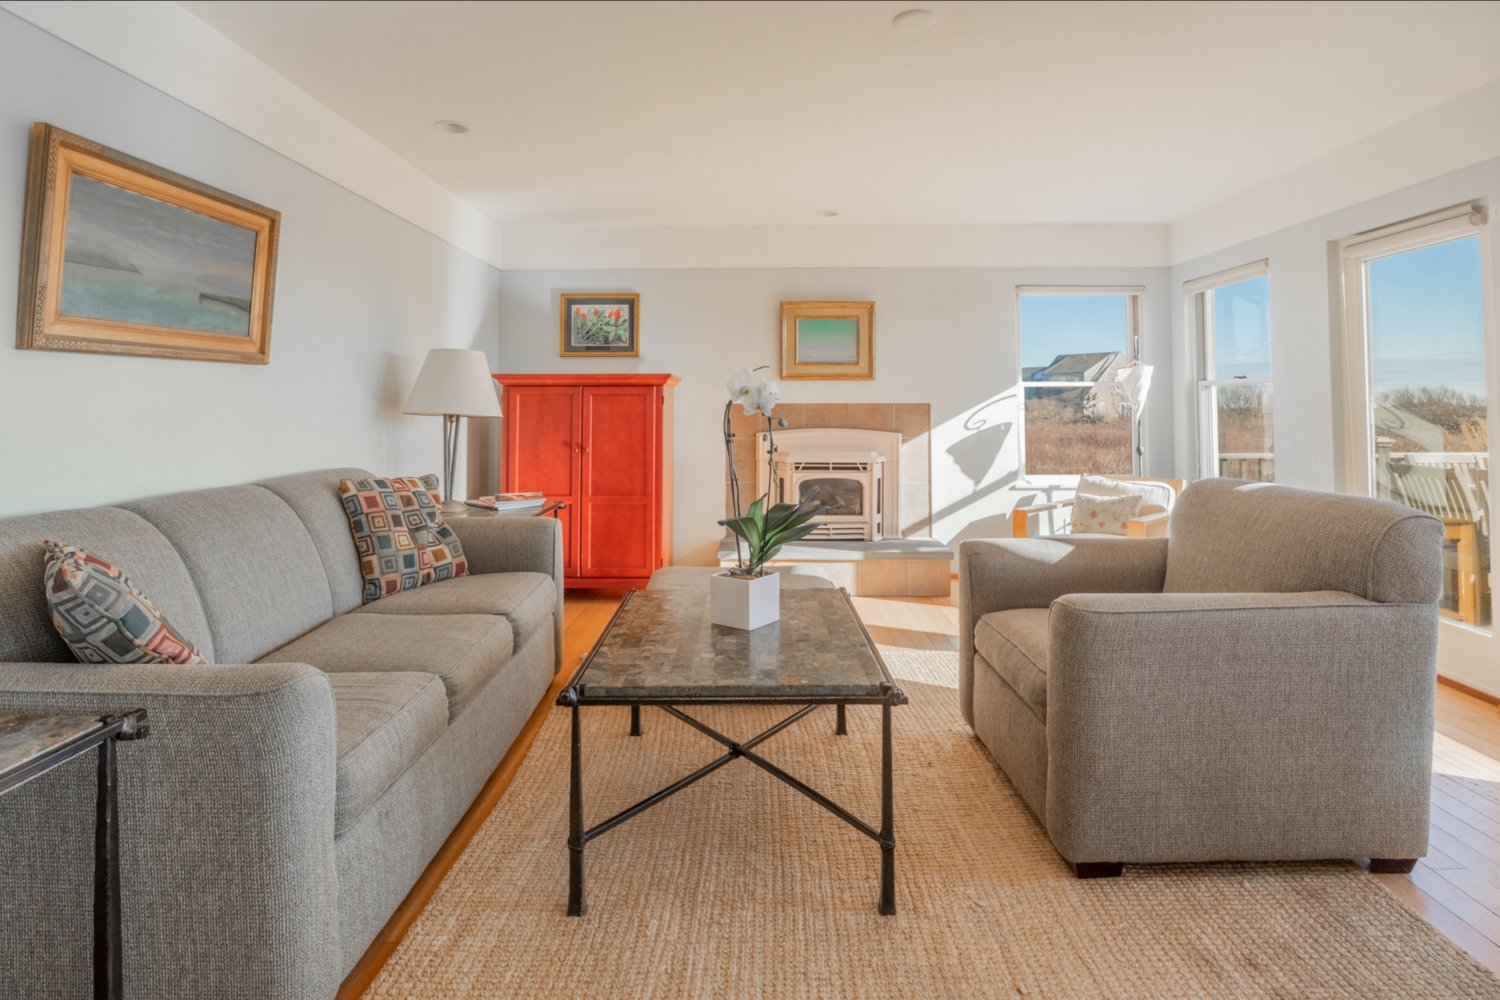 The living room has a gas fireplace and French doors that open to the south-facing deck that overlooks Miacomet Pond and the Atlantic Ocean.